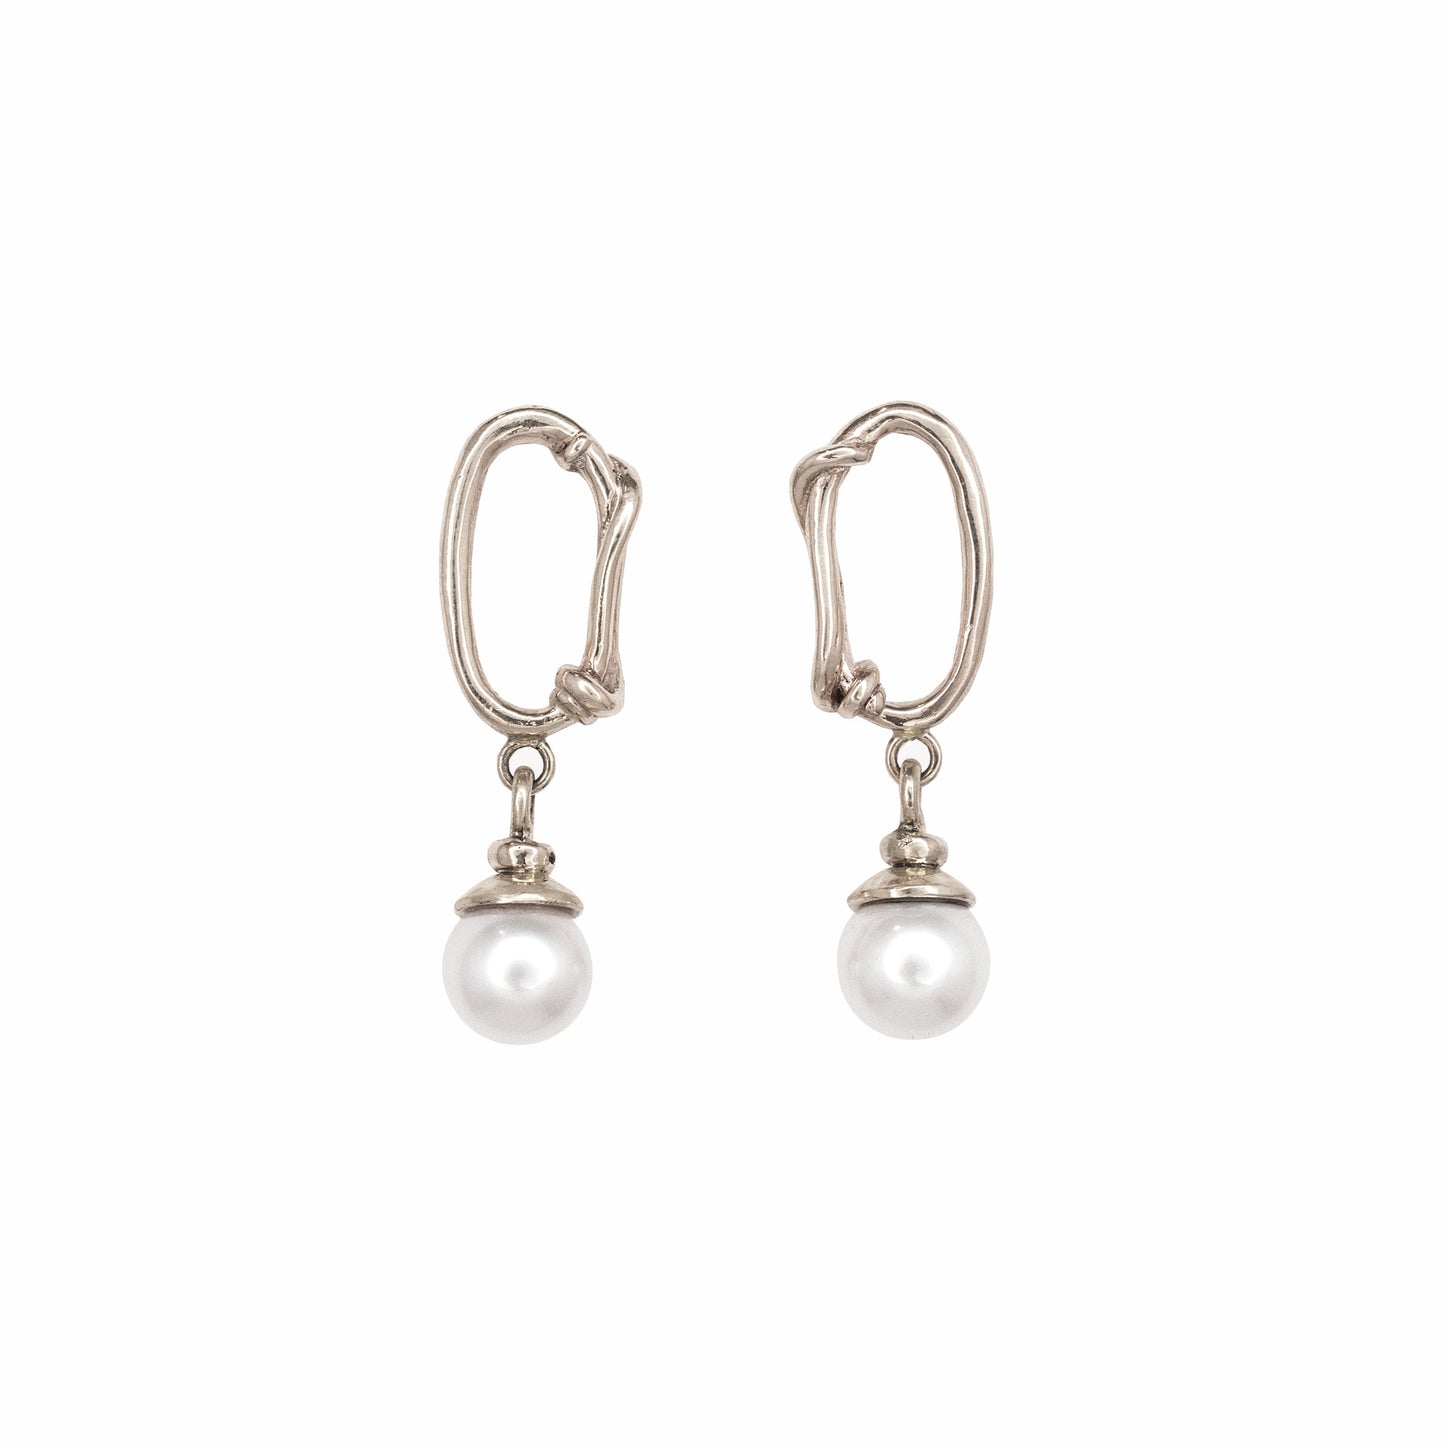 14k Oval Link Yellow or White Gold Posts with Round Akoya Pearl